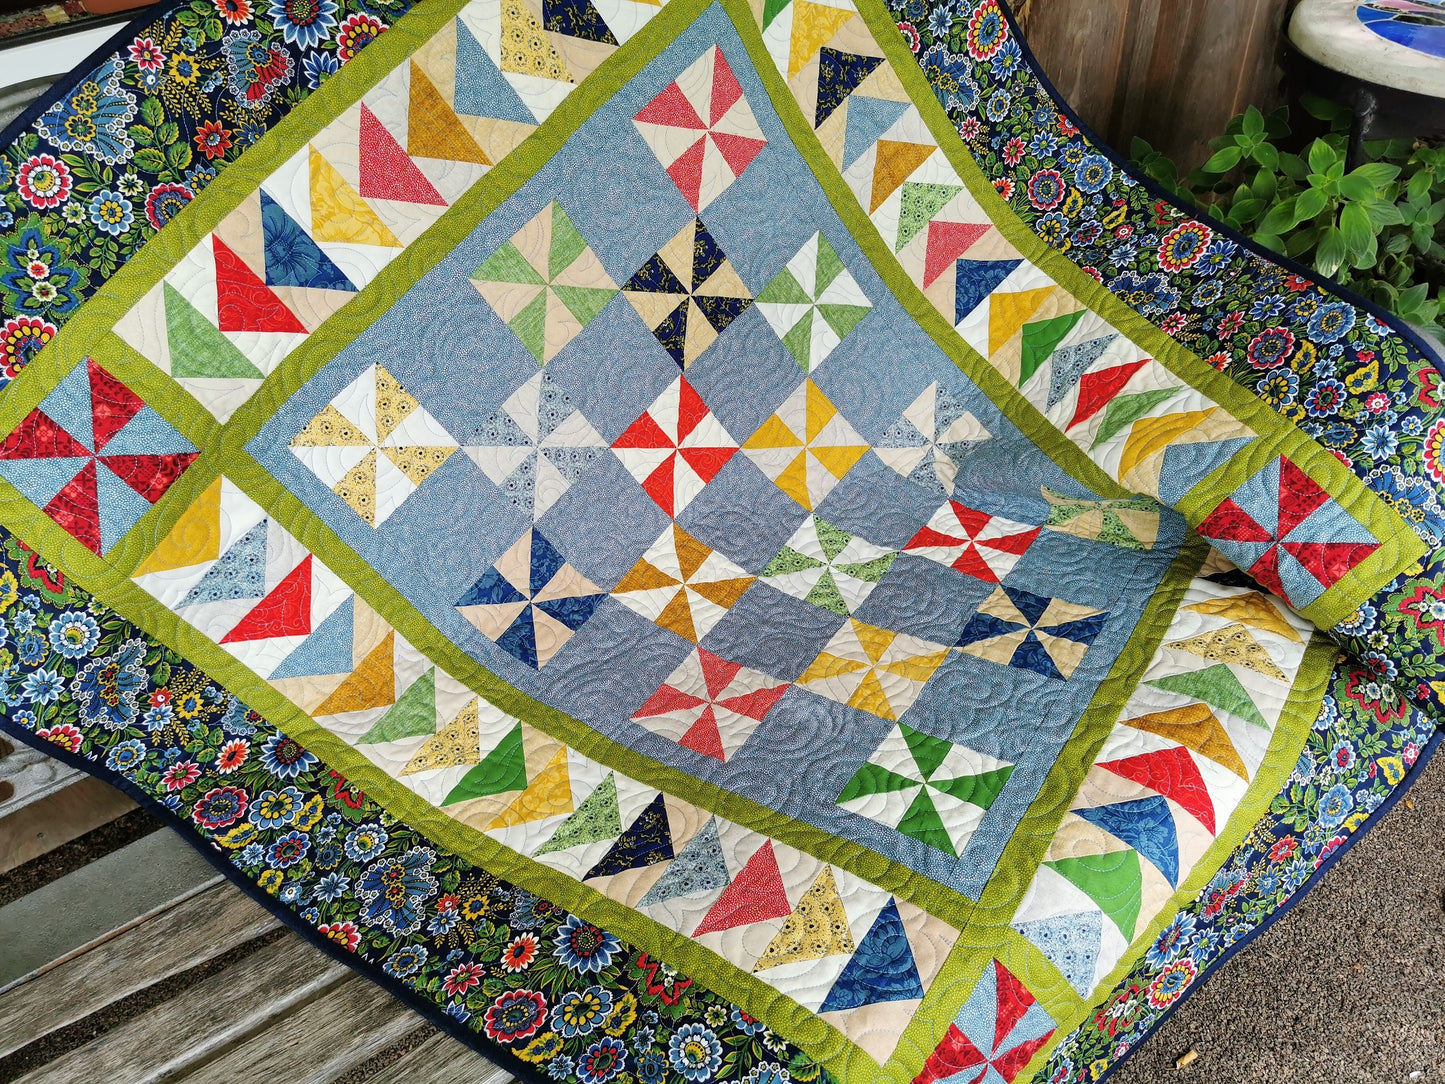 This bright pinwheel quilt is framed by a beautiful blue floral print. The border colors are repeated throughout the the triangle piecing in the main part of the quilt.  Happy primary colors of red, green, yellow, blue, pink, gold. Main color is blue with various shades of the other  colors. 